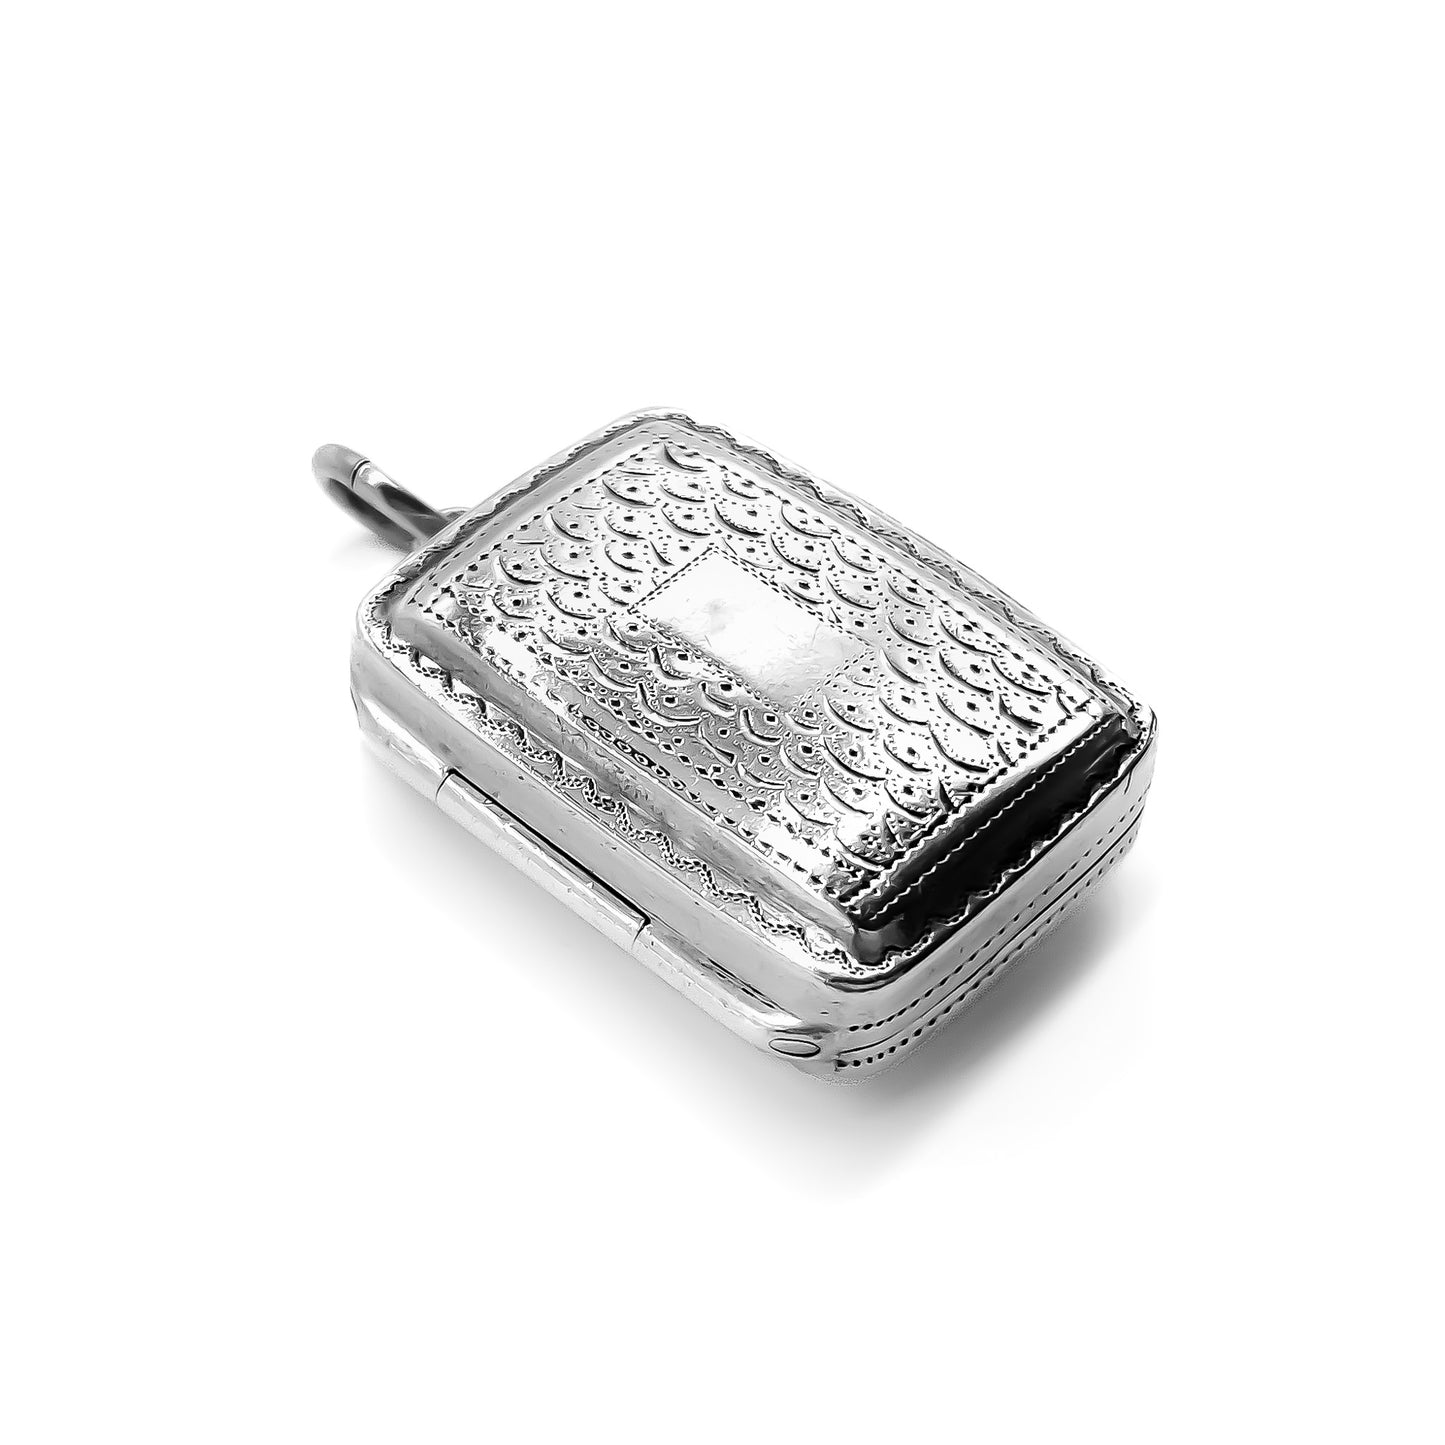 Lovely sterling silver Georgian vinaigrette, ideal to be worn as a pendant.